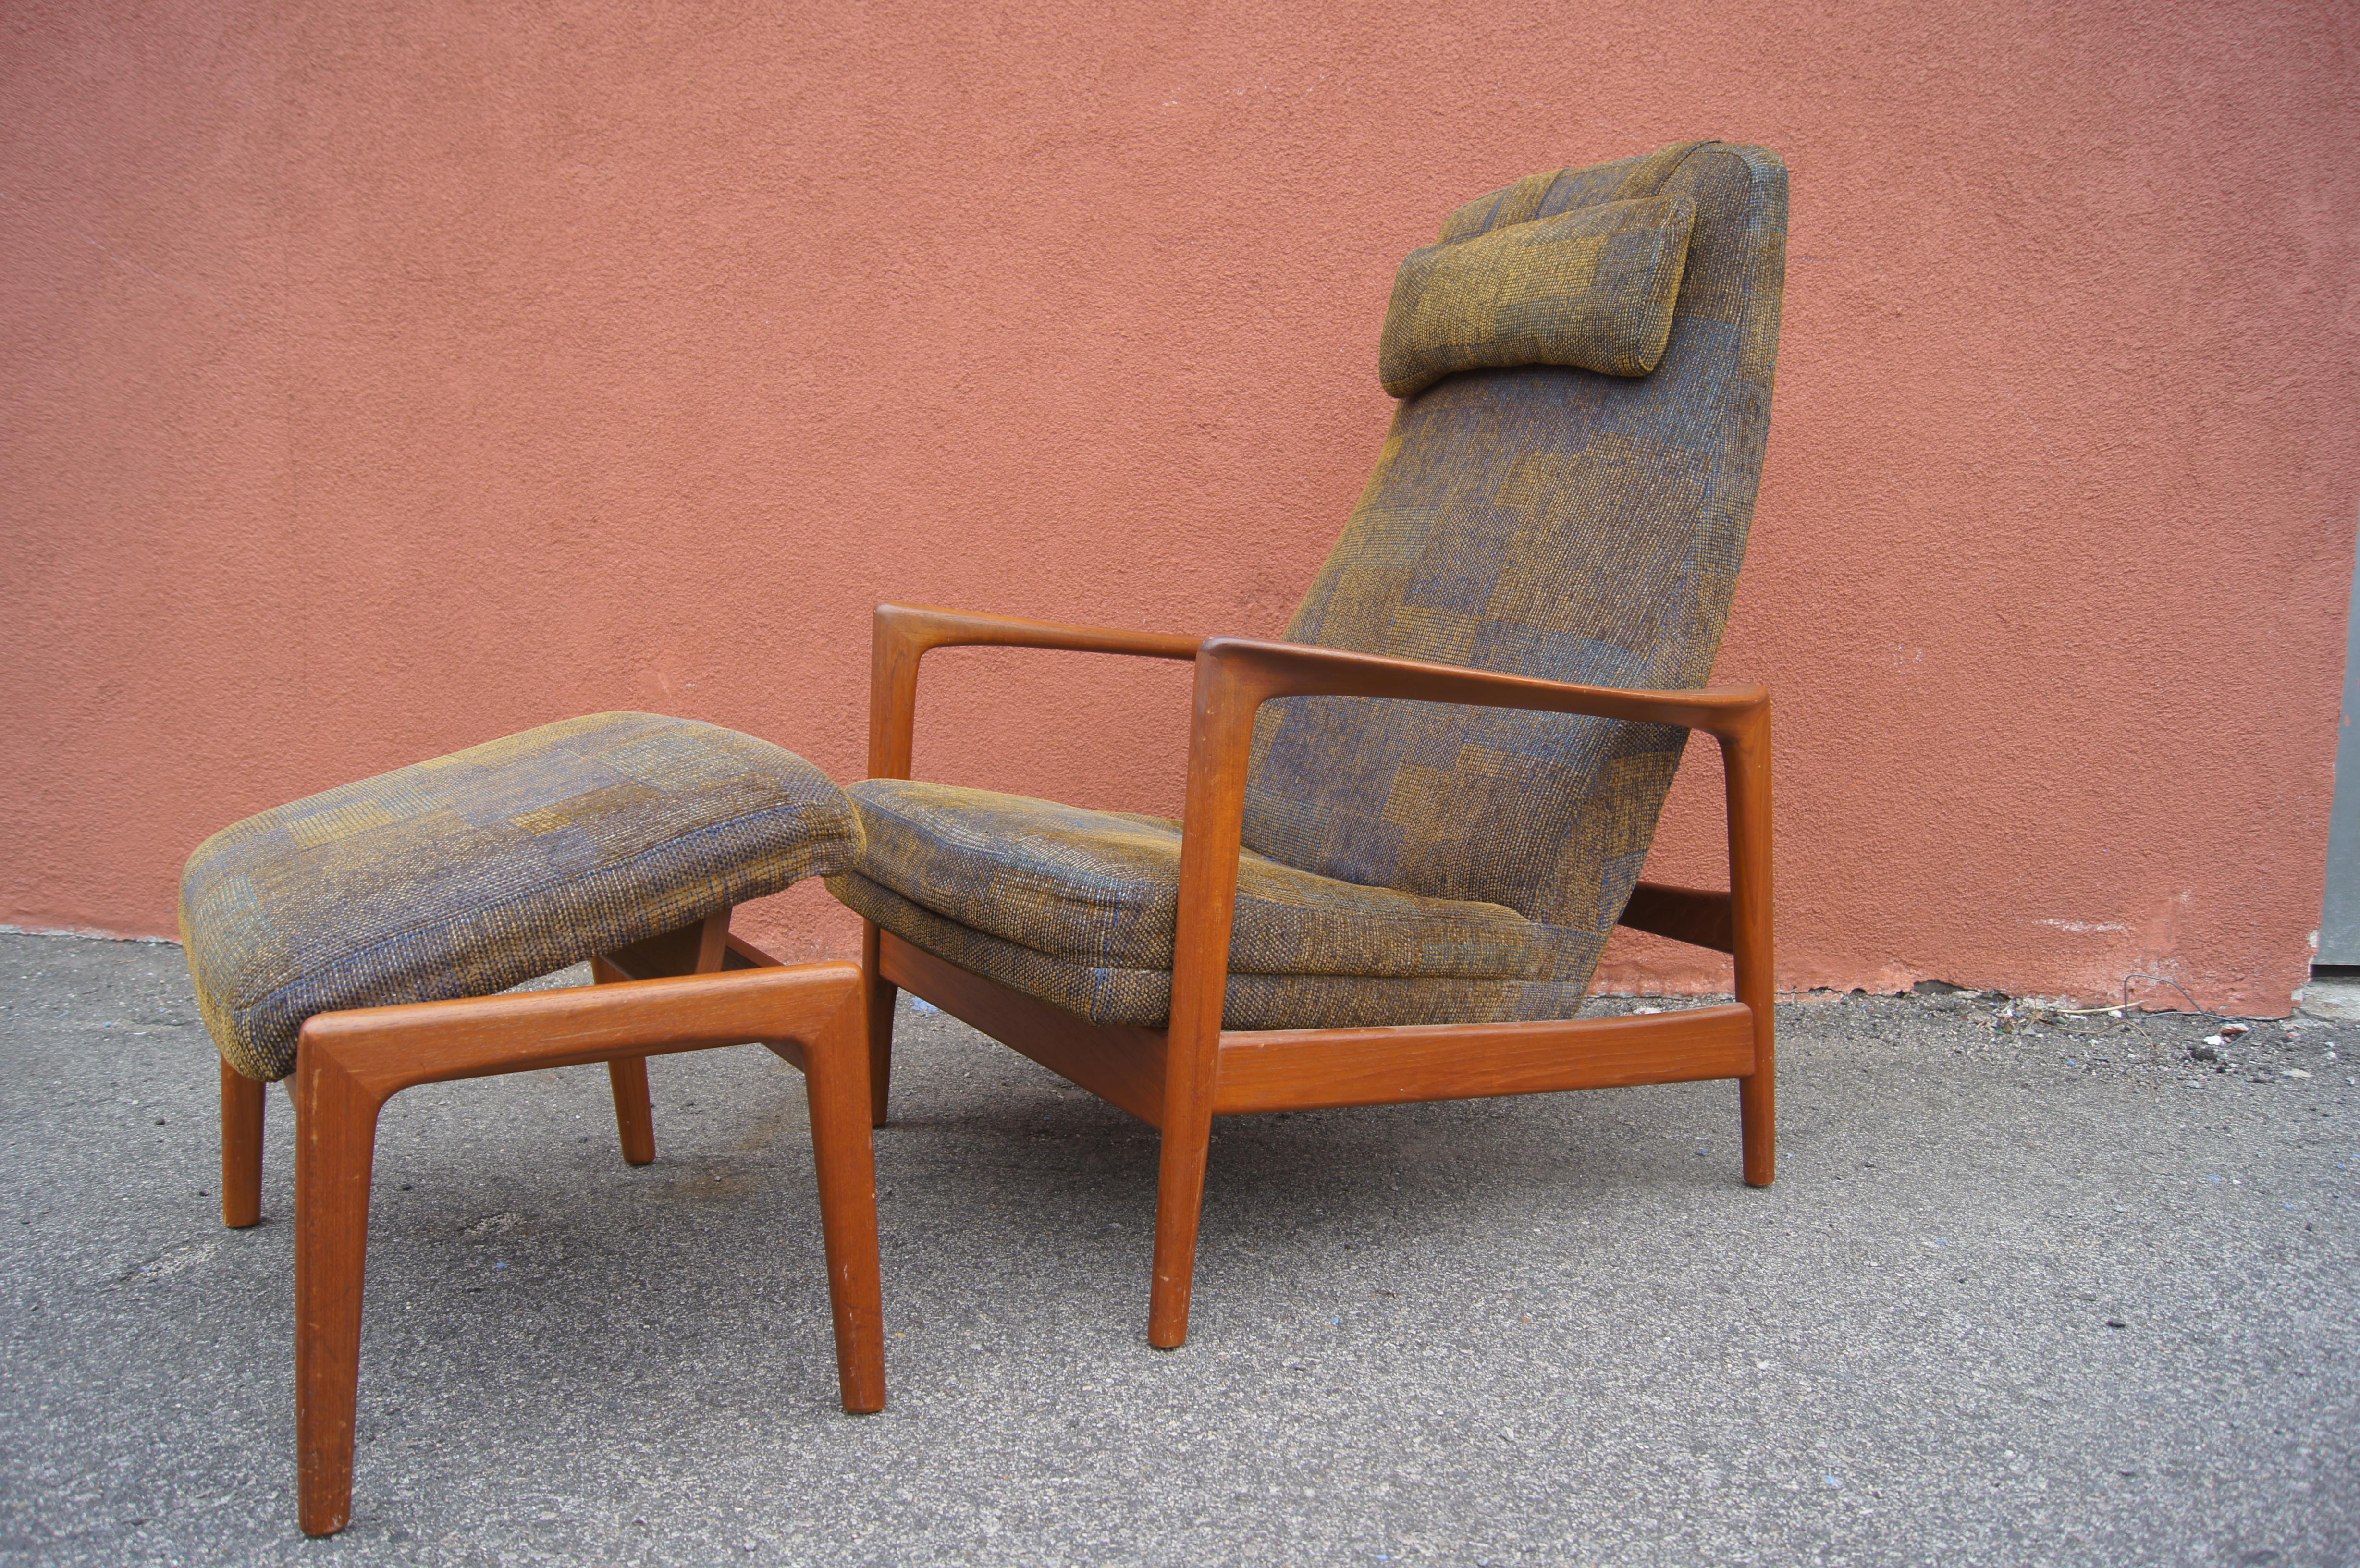 Designed by Folke Ohlsson for DUX, this handsome 1960s lounge chair and ottoman features a teak frame that adjusts while seated to provide a comfortable recline.
 